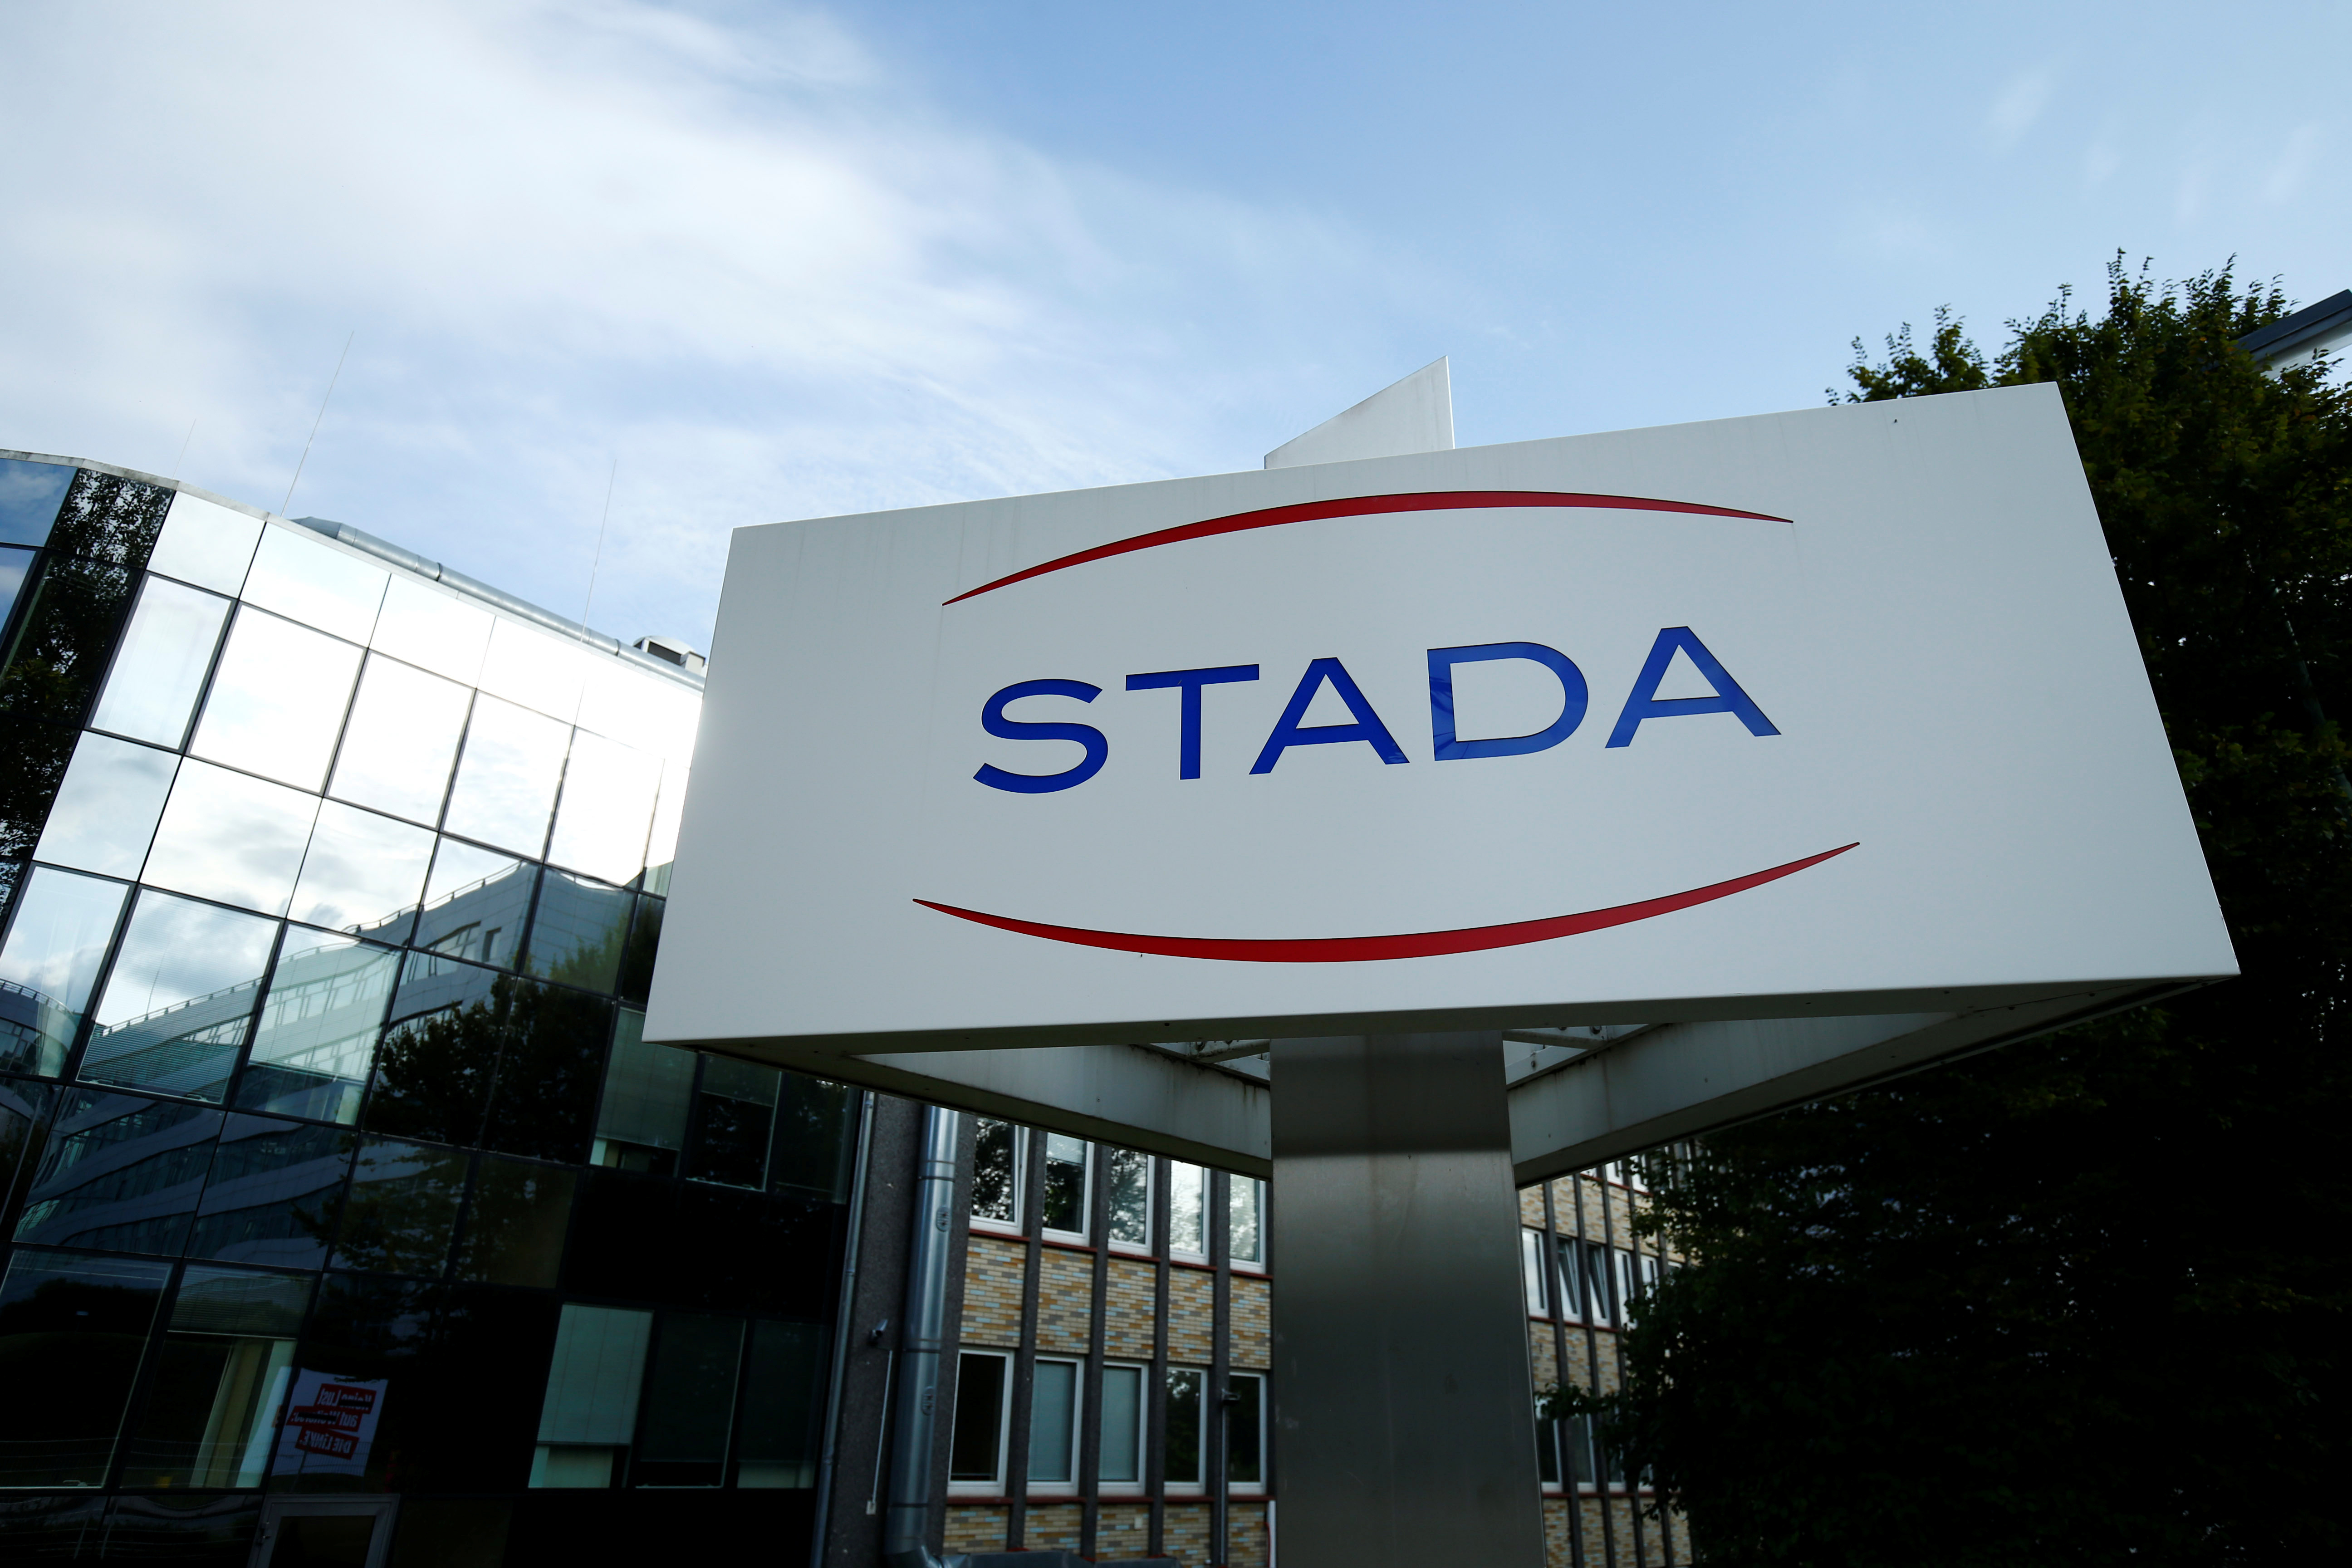 The logo of Stada Arzneimittel AG is pictured at their headquarters in Bad Vilbel near Frankfurt